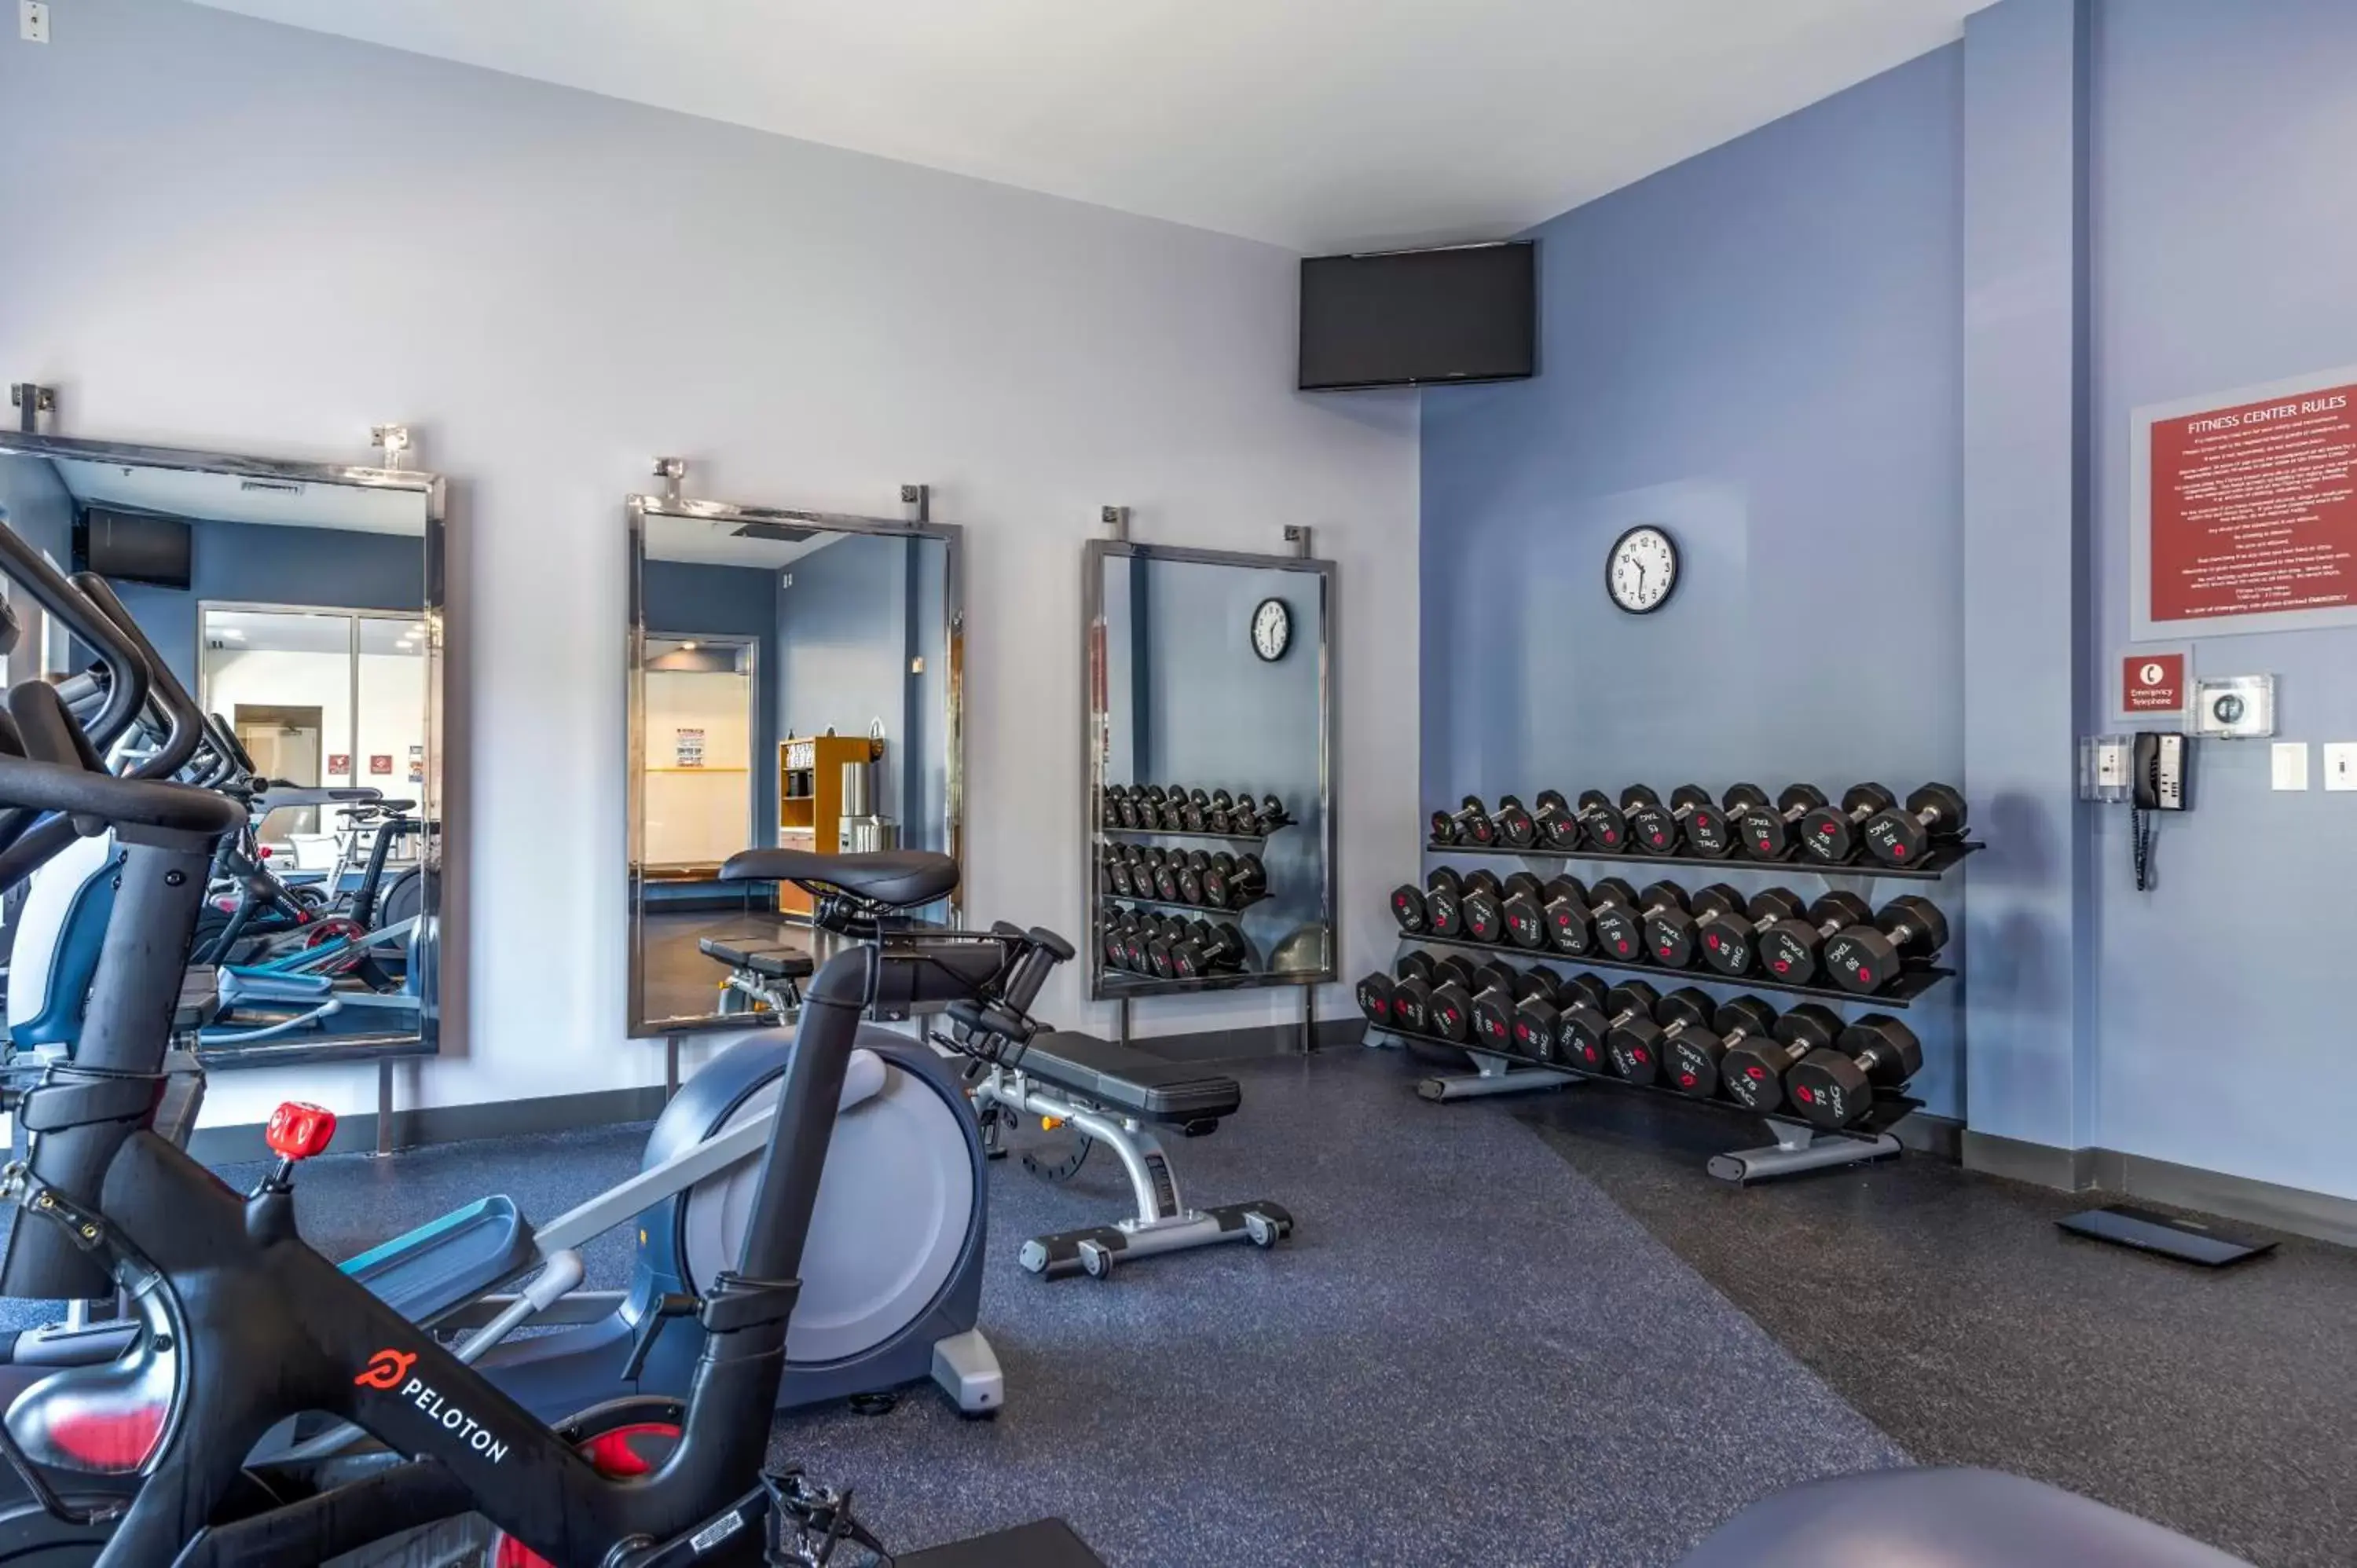 Fitness centre/facilities, Fitness Center/Facilities in DoubleTree by Hilton Raleigh-Cary